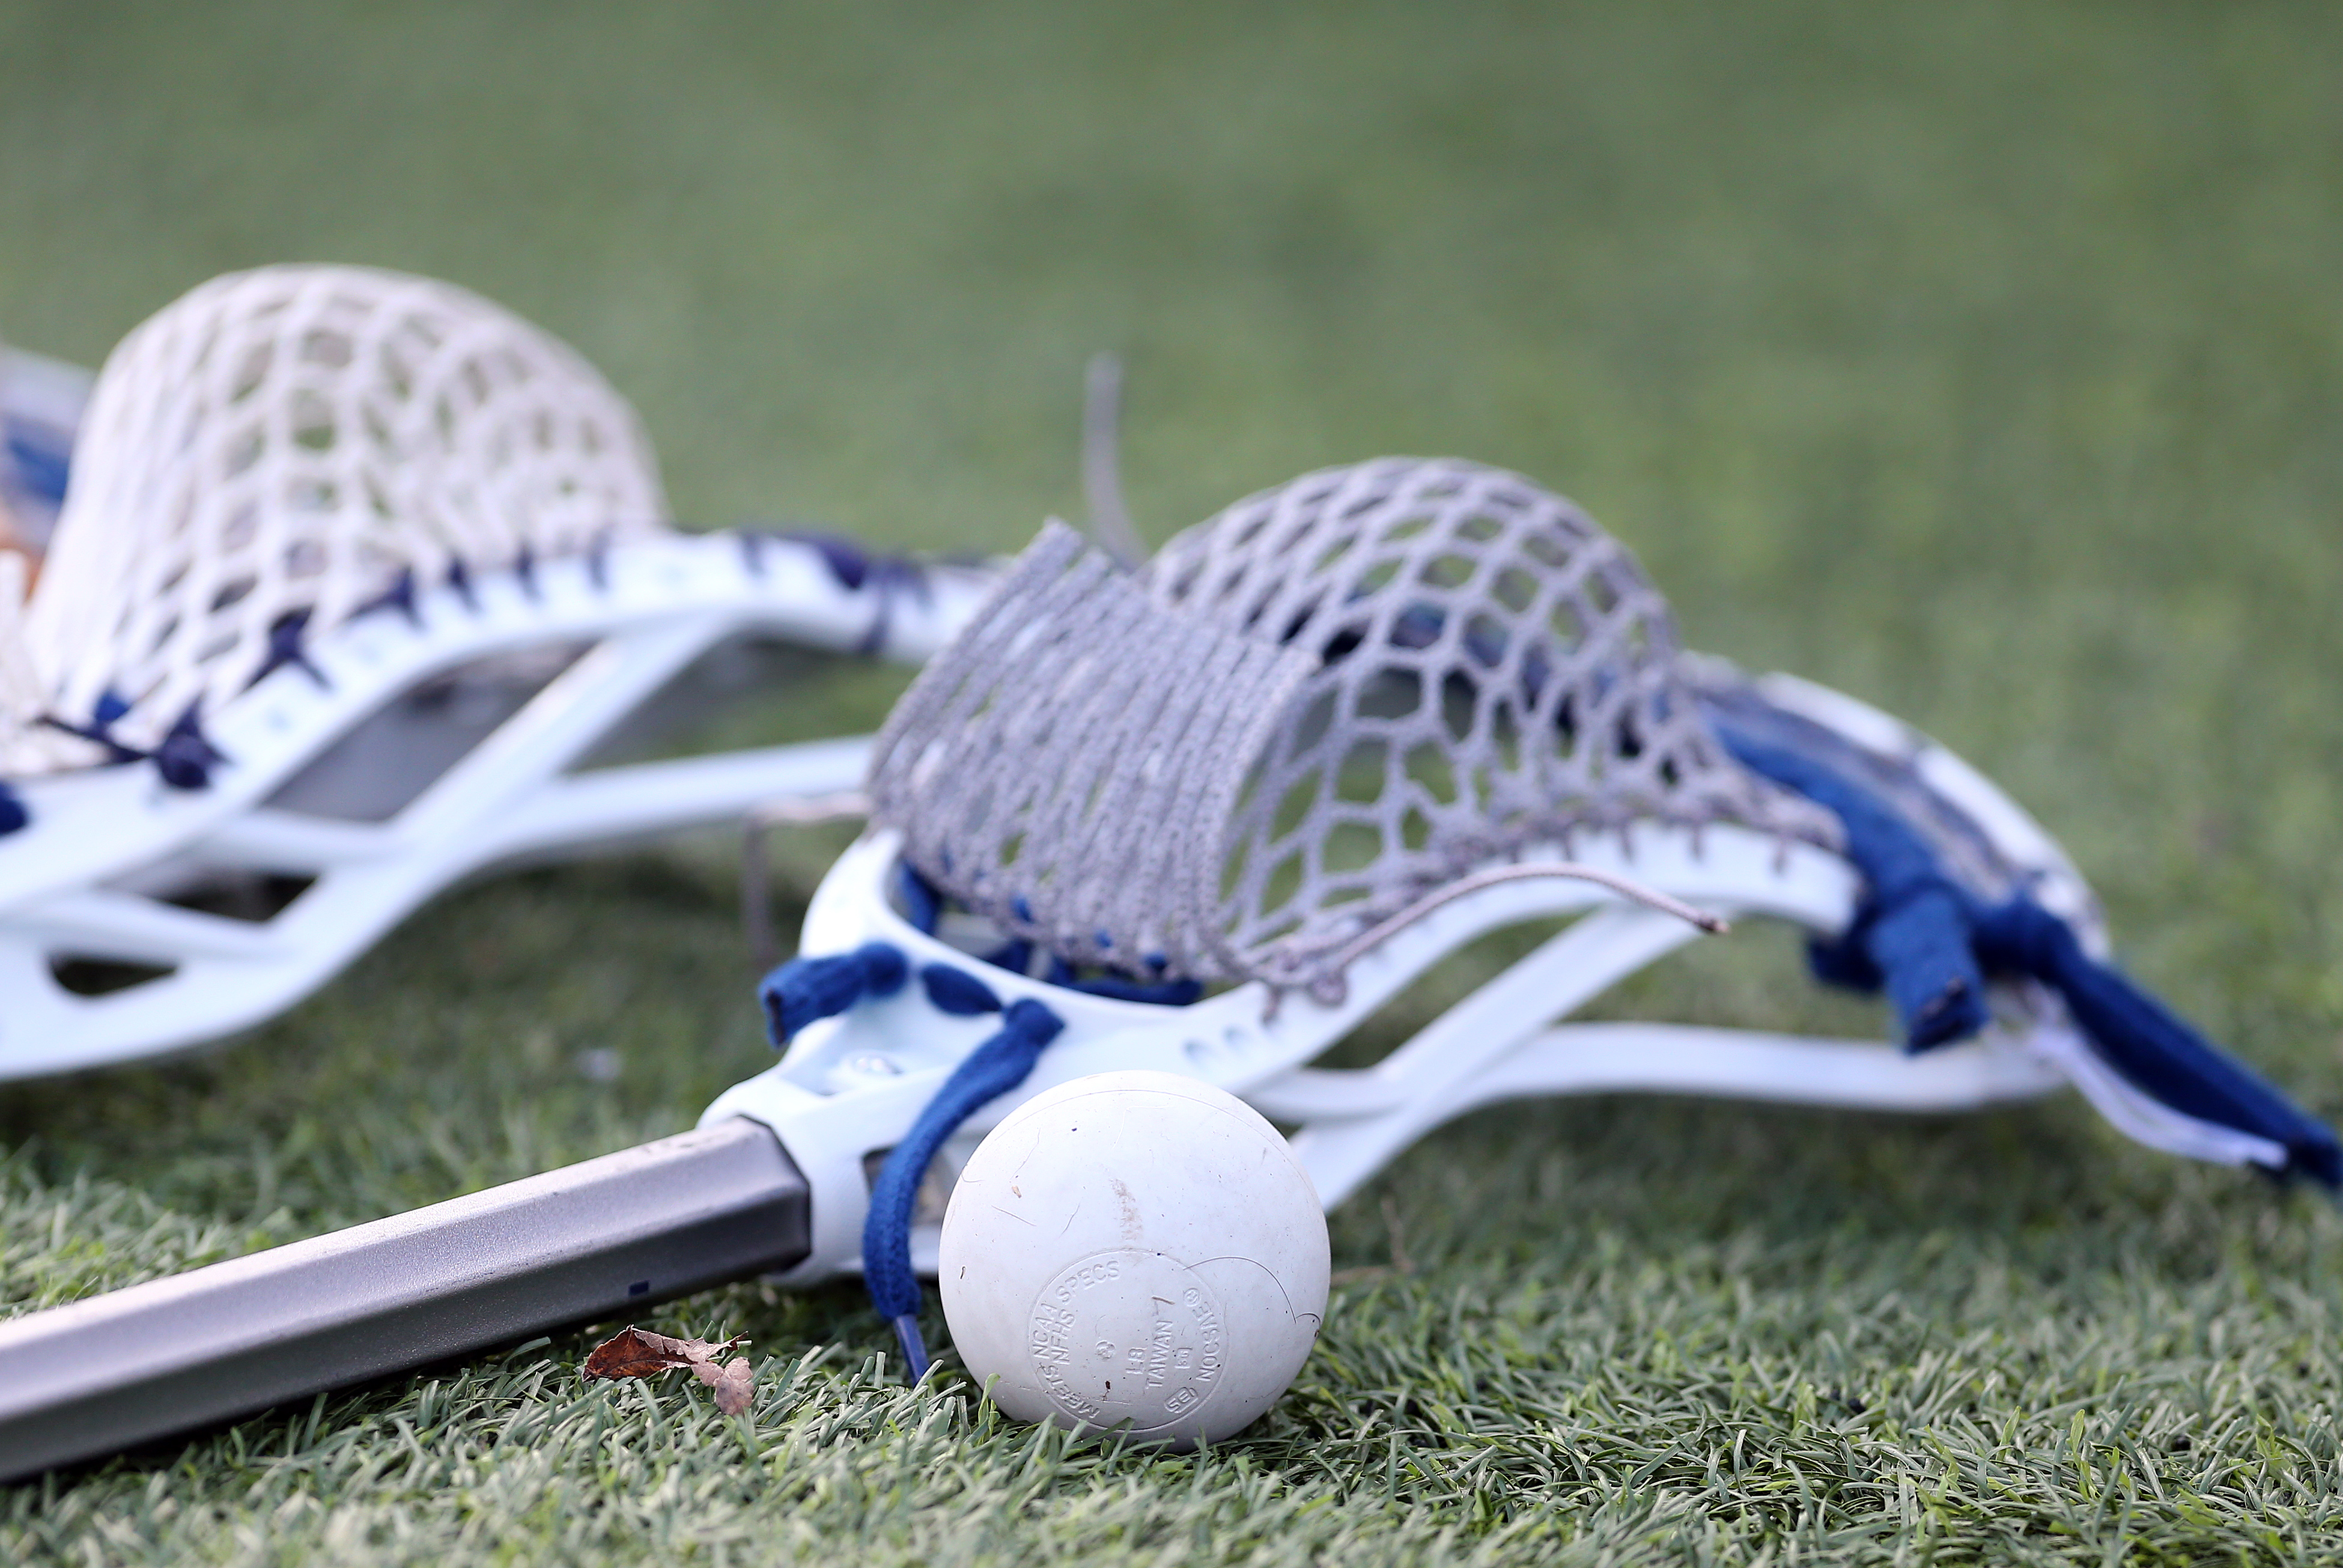 Ex-UVA Lacrosse Player George Huguely V Ordered to Pay $15M In Wrongful Death Lawsuit